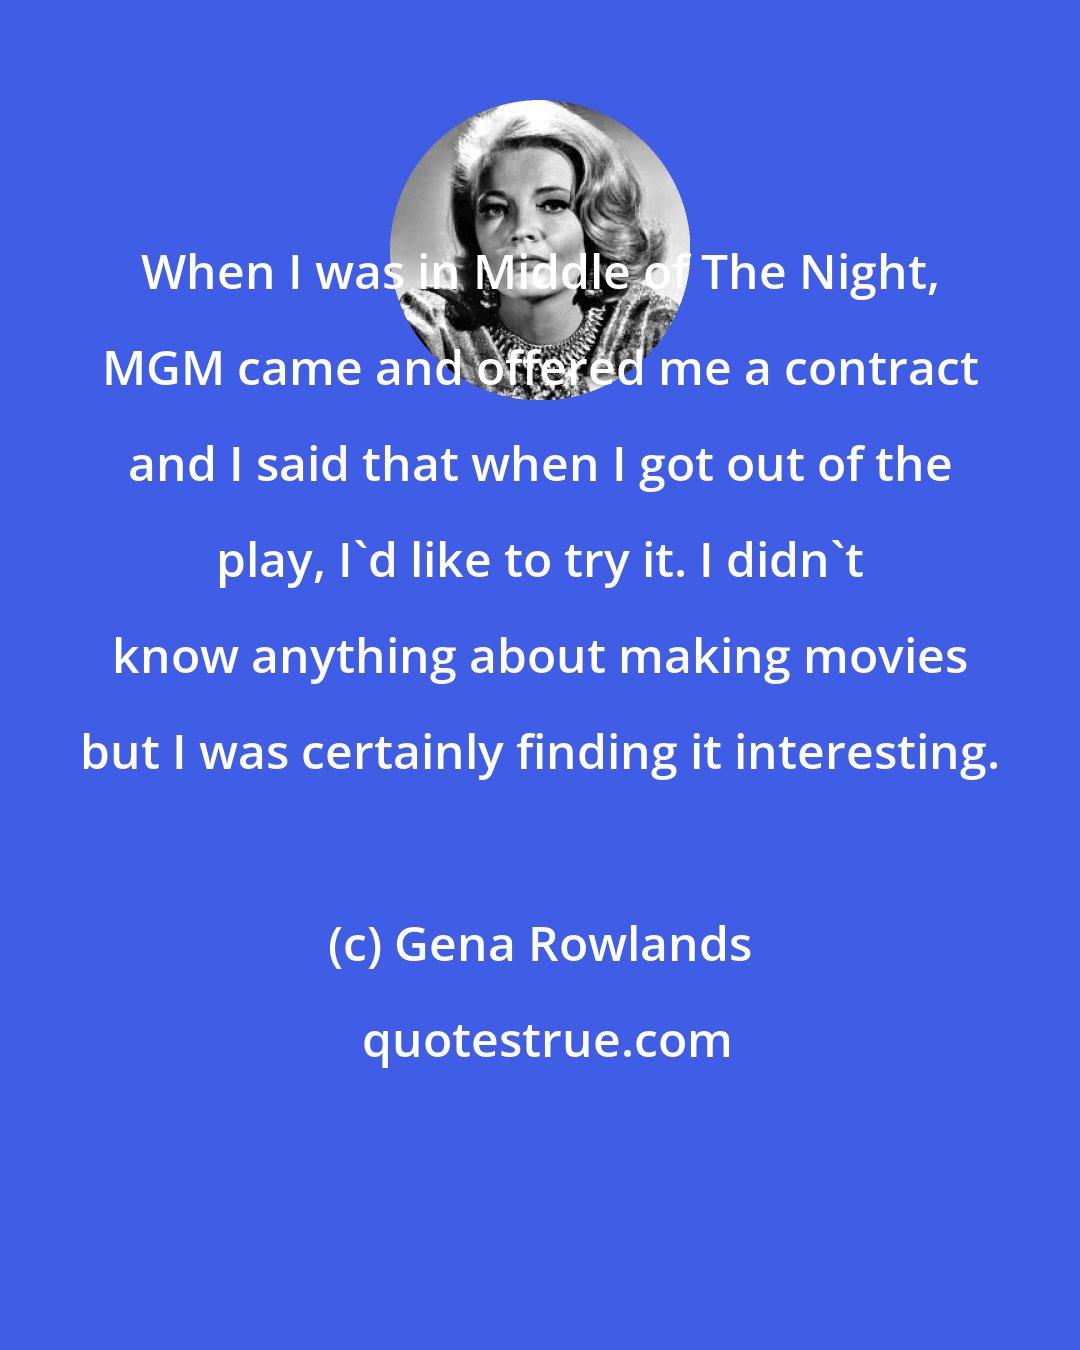 Gena Rowlands: When I was in Middle of The Night, MGM came and offered me a contract and I said that when I got out of the play, I'd like to try it. I didn't know anything about making movies but I was certainly finding it interesting.